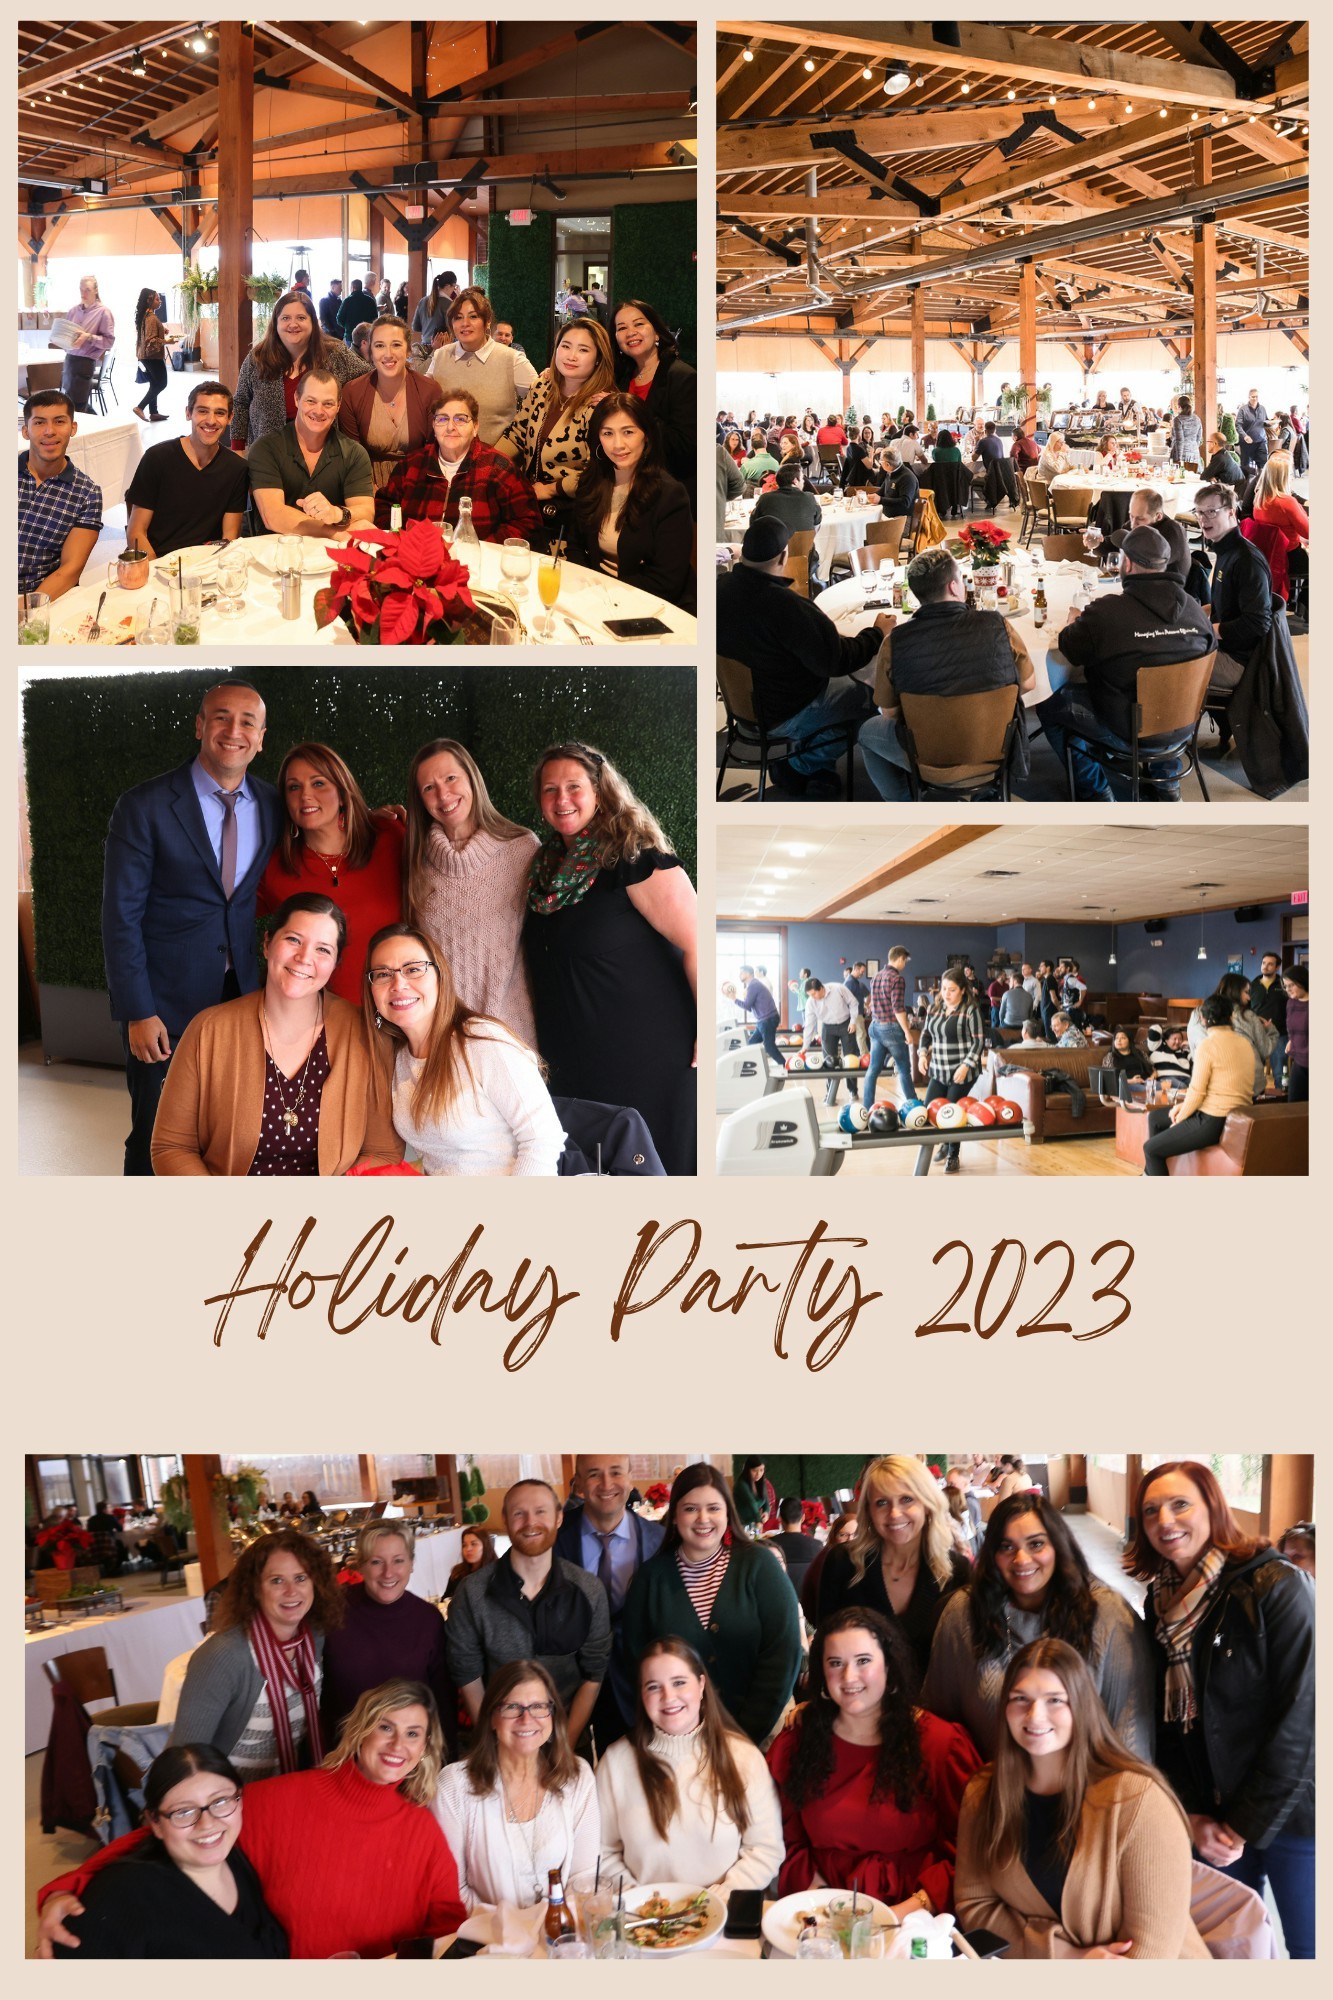 Our annual Holiday Party! This year was hosted at Pinstripes with bowling, bocce, food, and wonderful people!